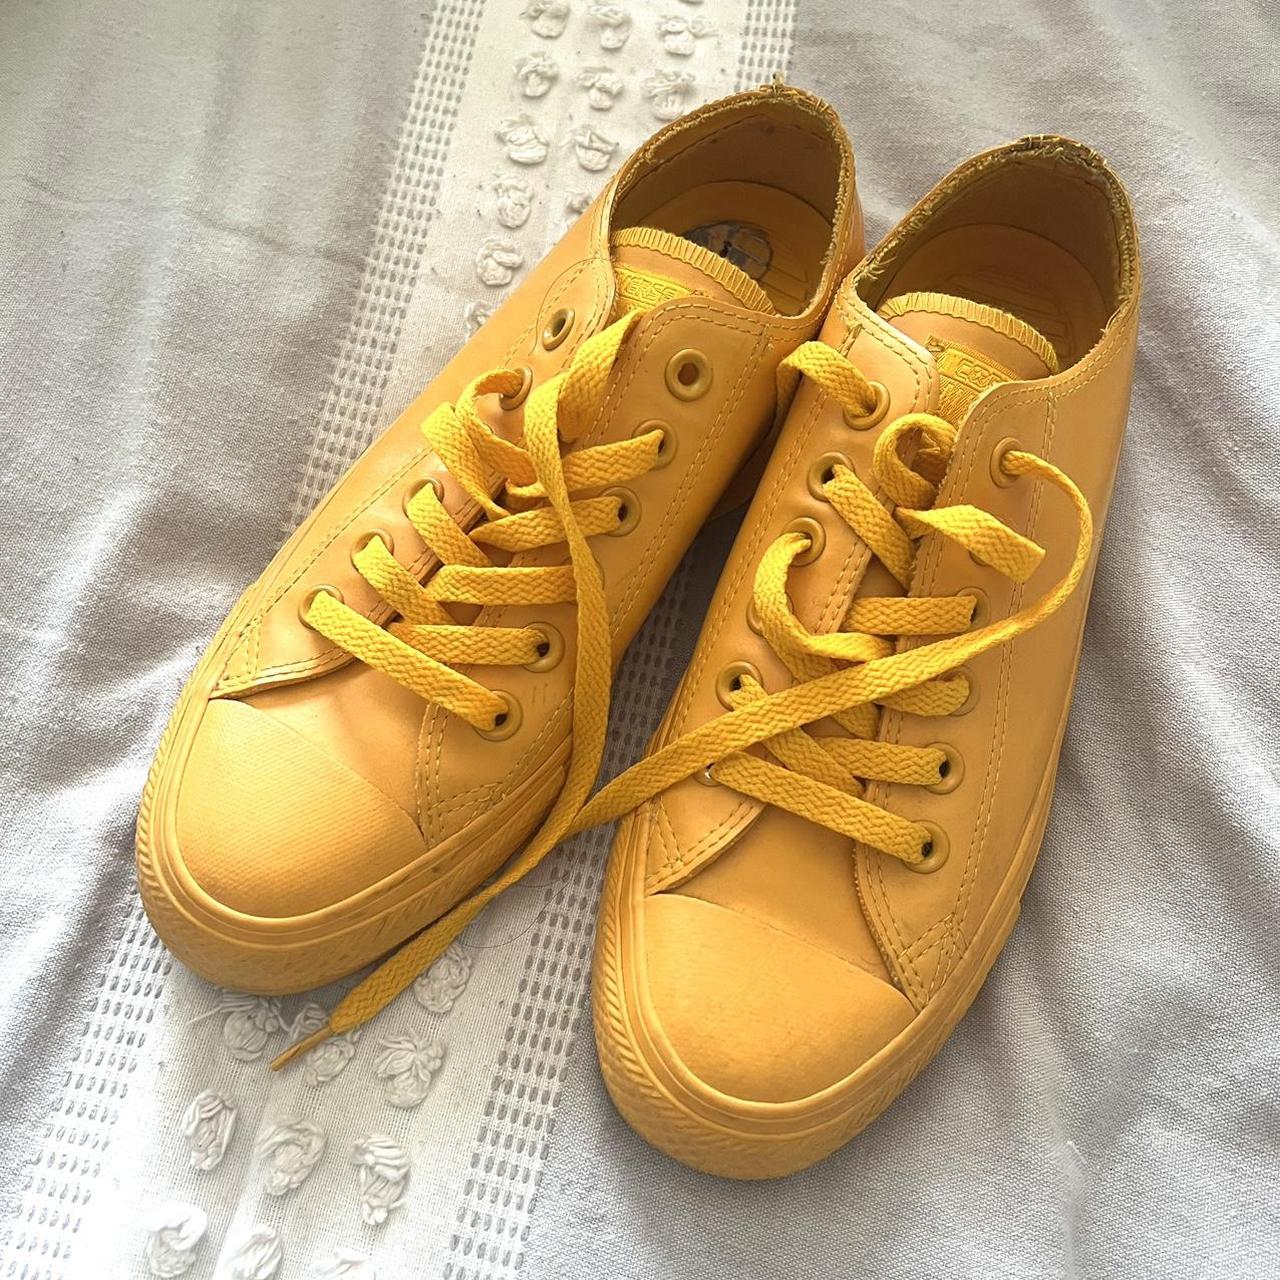 UNIQUE ALL RUBBER YELLOW CONVERSE SIZE WOMENS 7 - Depop